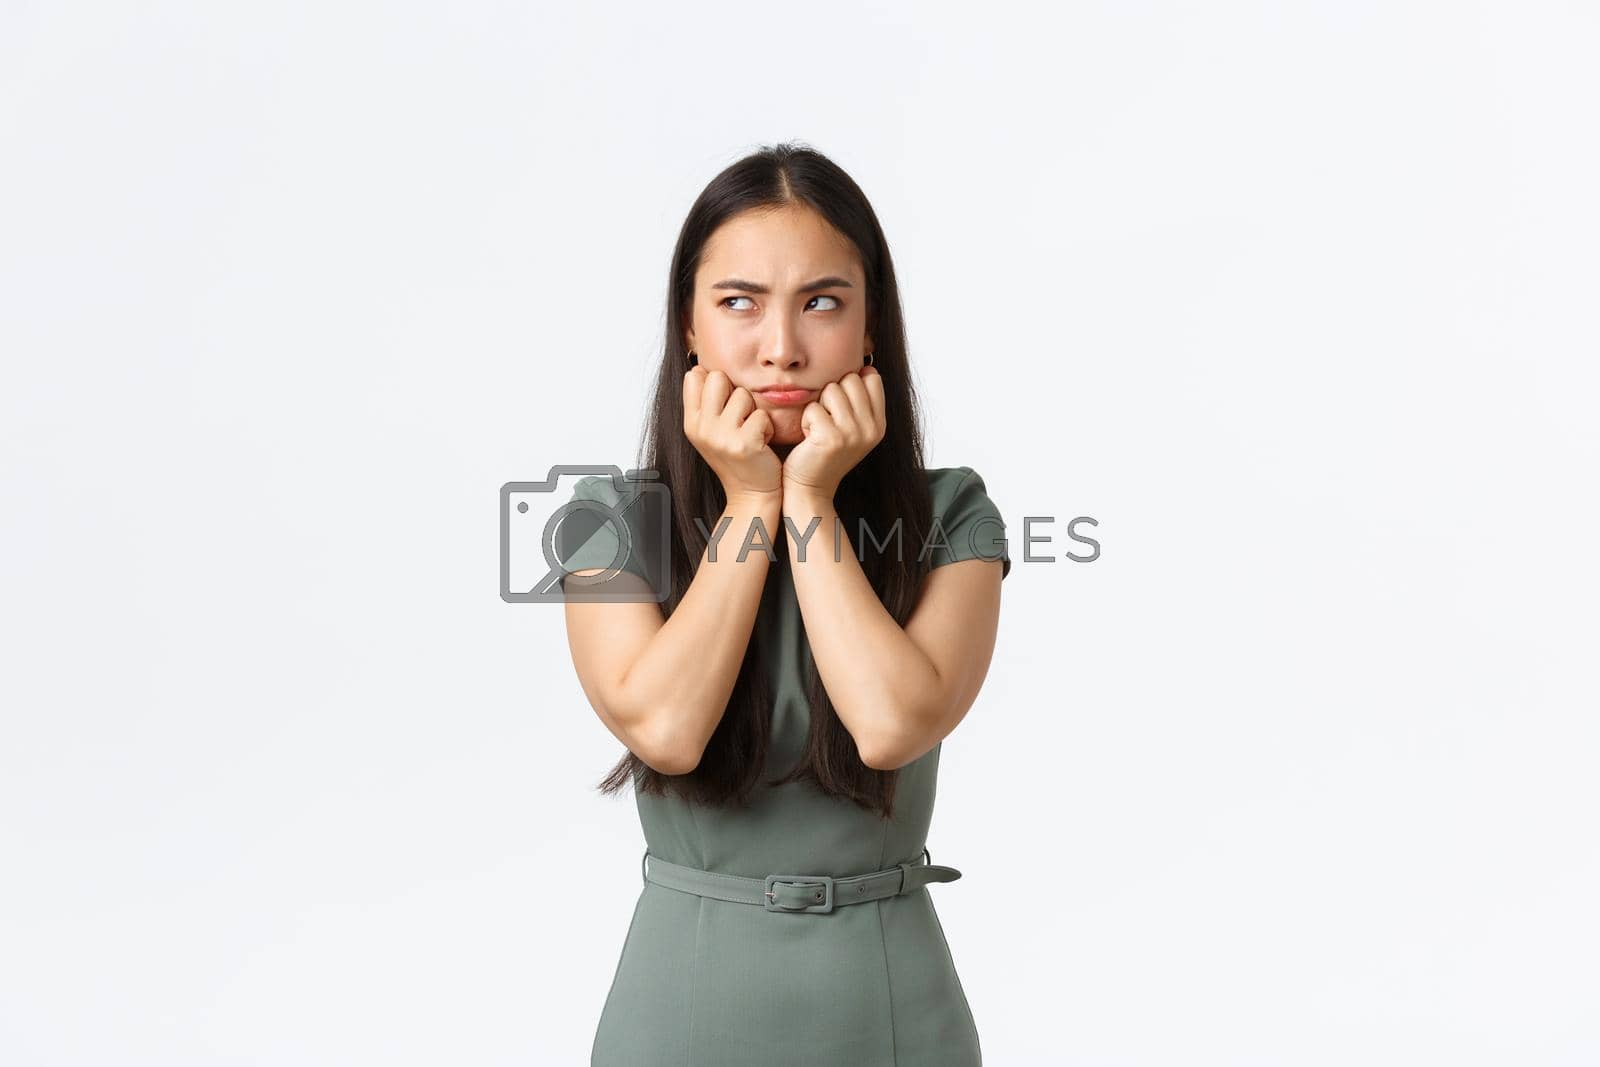 Royalty free image of Small business owners, women entrepreneurs concept. Pouting moody asian girlfriend acting childish as looking left offended, sulking over argument or confrontation with boyfriend, white background by Benzoix